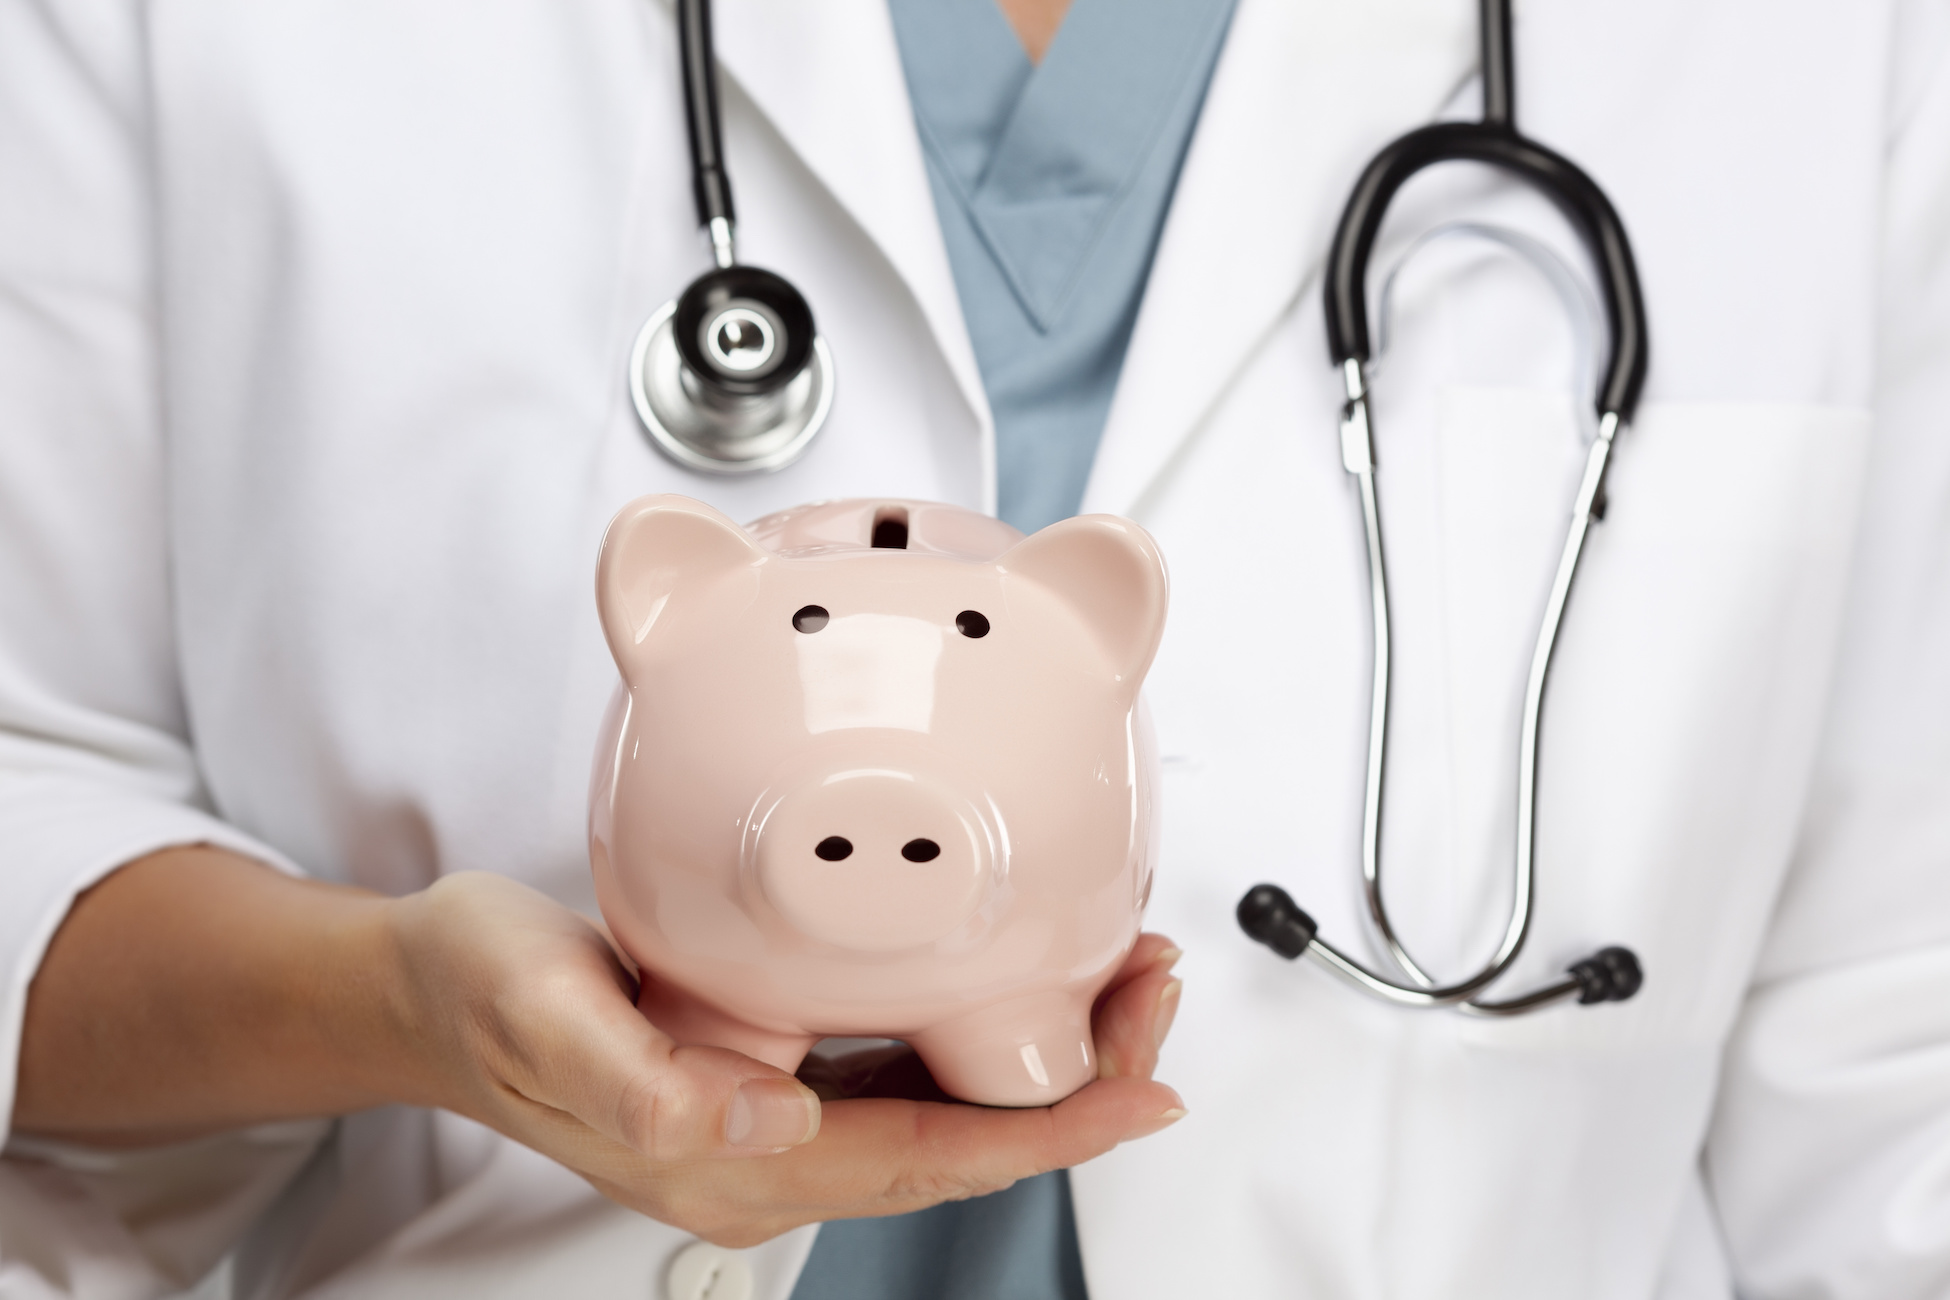 Physician thinking about the 6 financial mistakes they should avoid | Vanguard Communications | Denver, CO